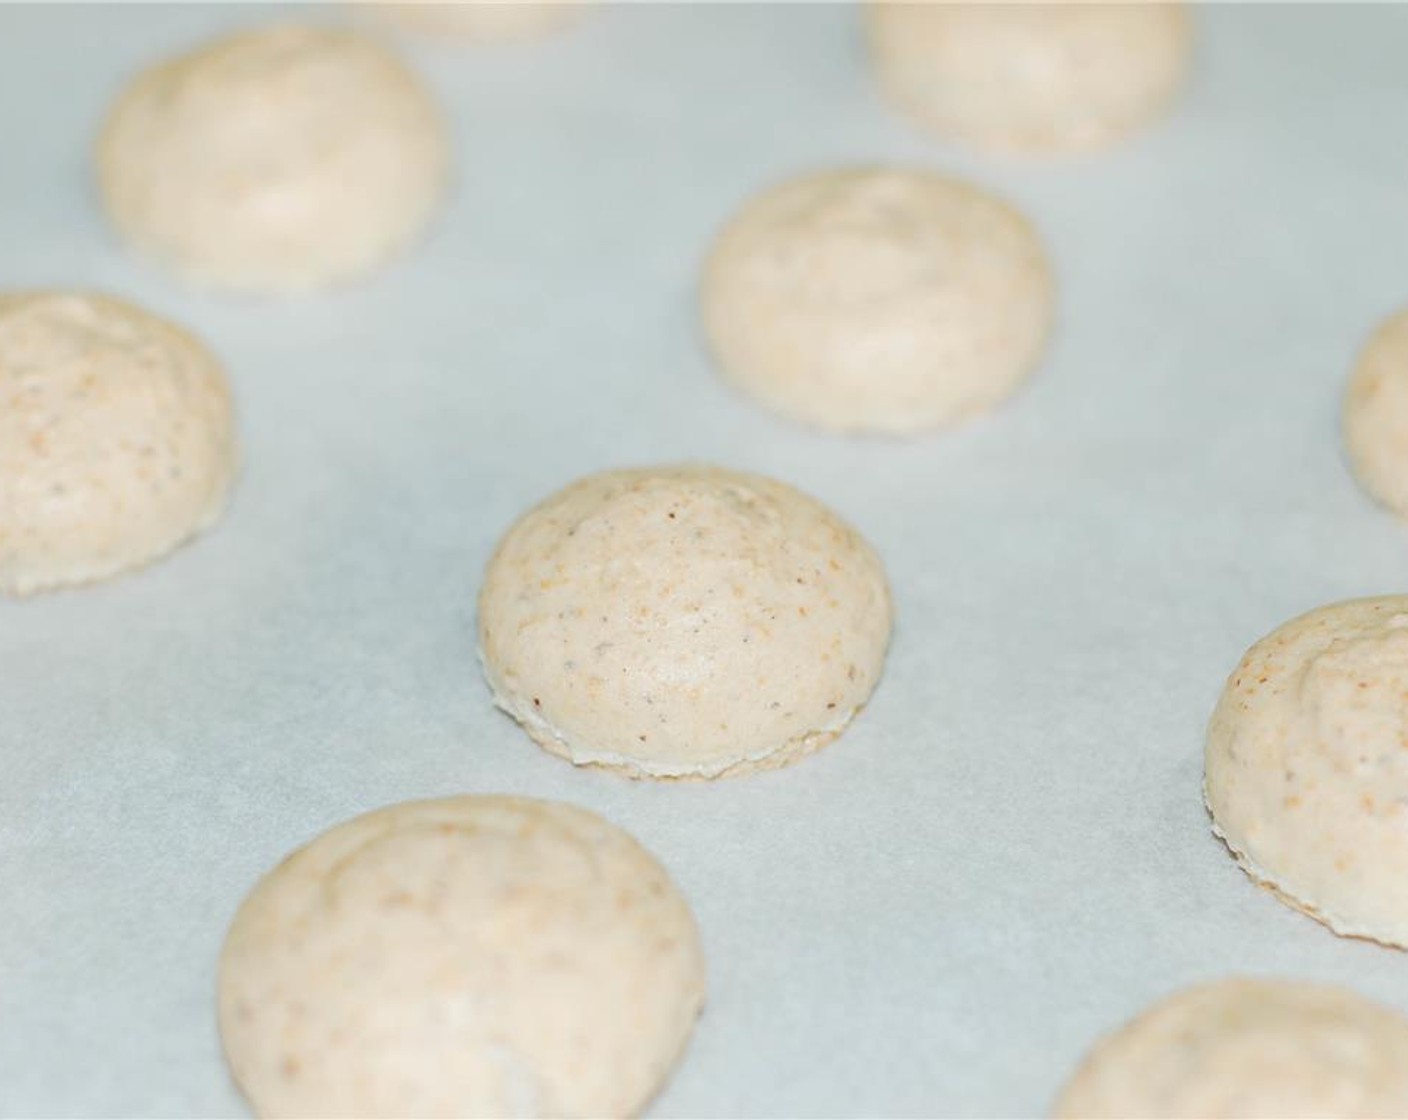 step 12 Remove from oven and let cool for 2-3 minutes. Then carefully remove the macarons from parchment paper and place on a wire rack to cool completely.